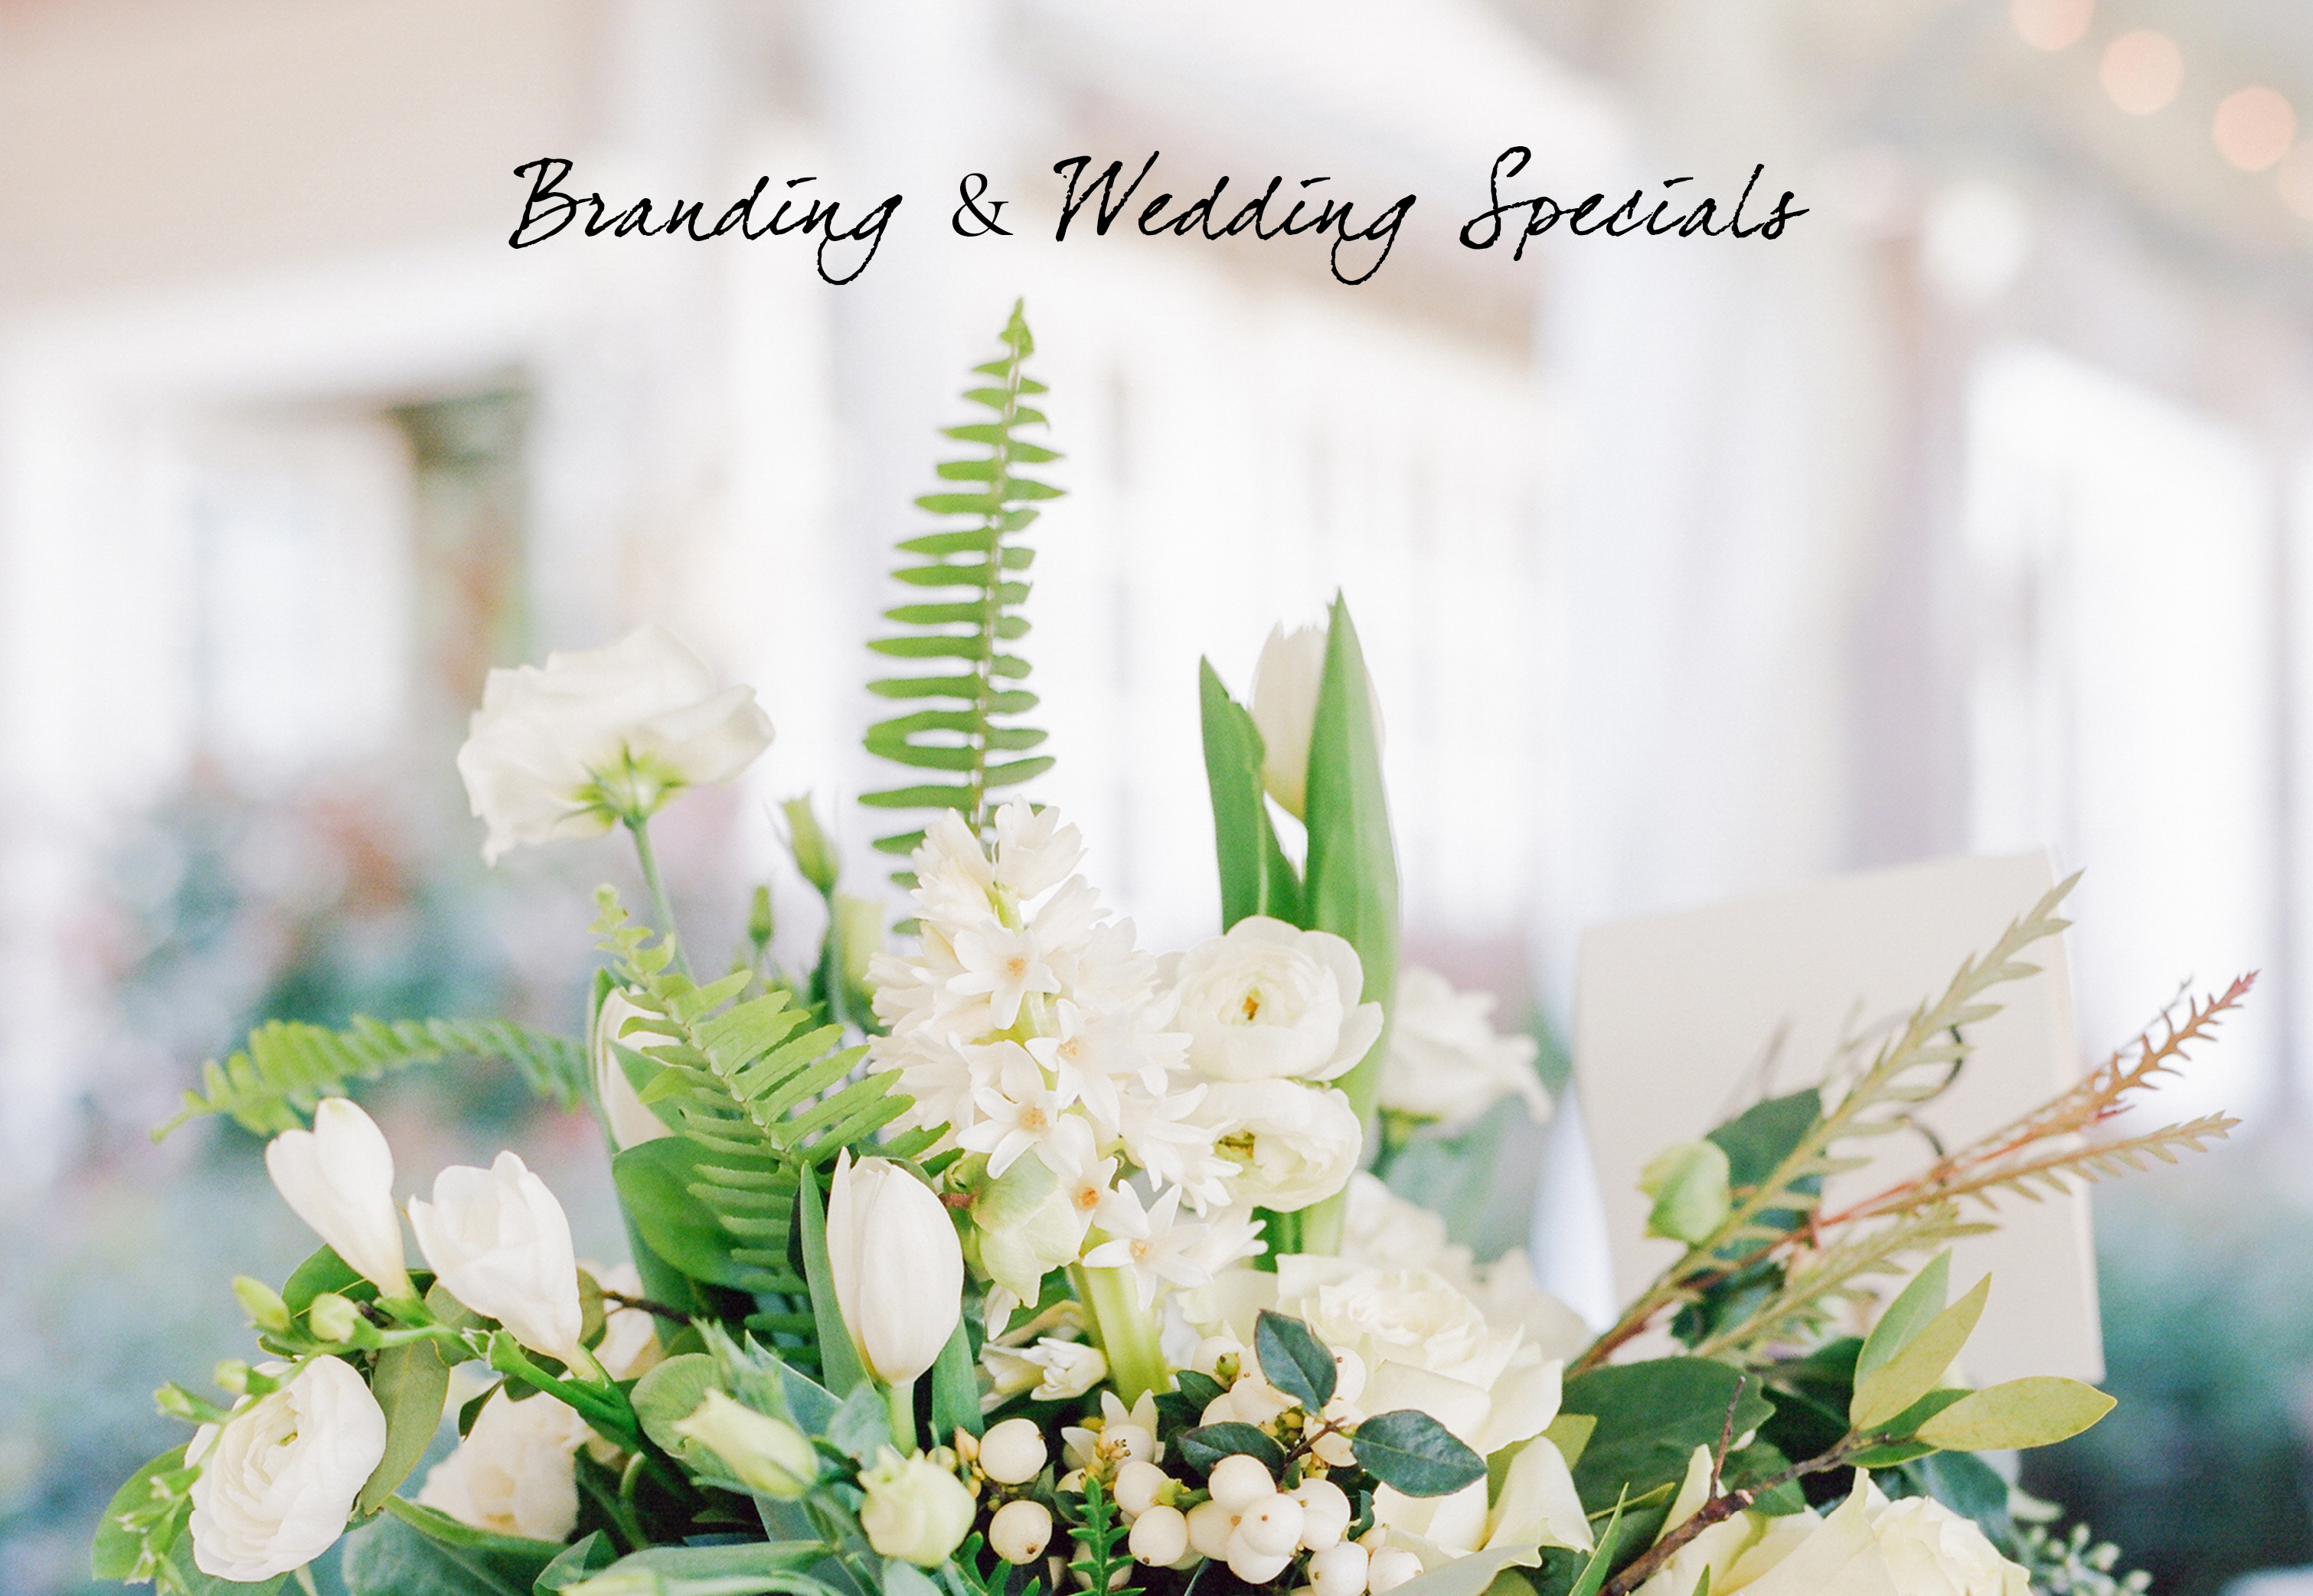 Black Friday Sale | Branding Sessions | Wedding Photography | www.msp-photography.com